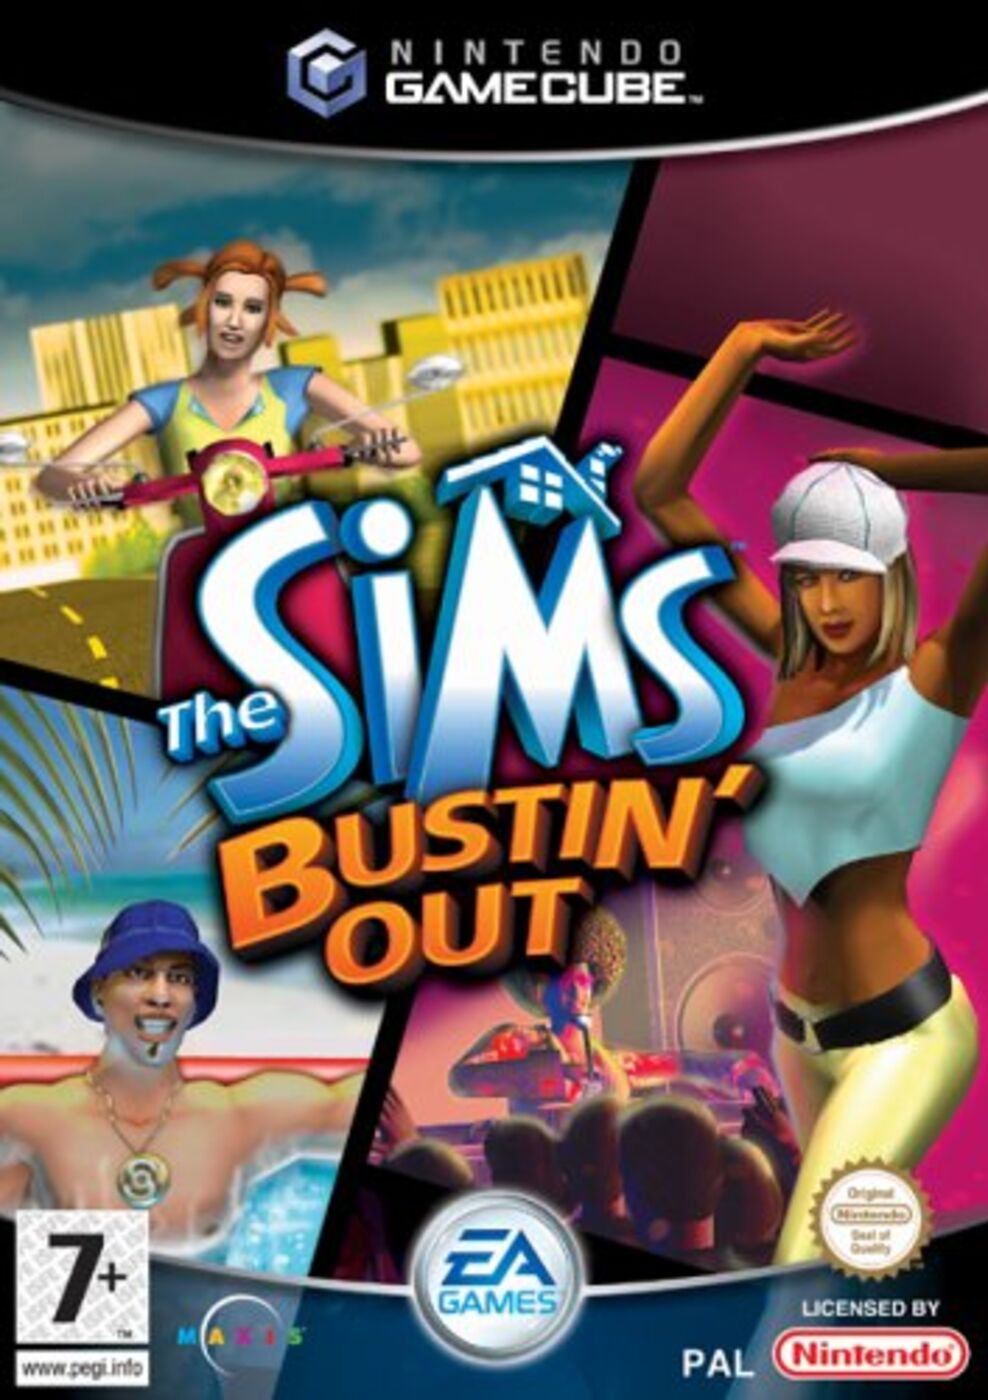 the sims bustin out for pc